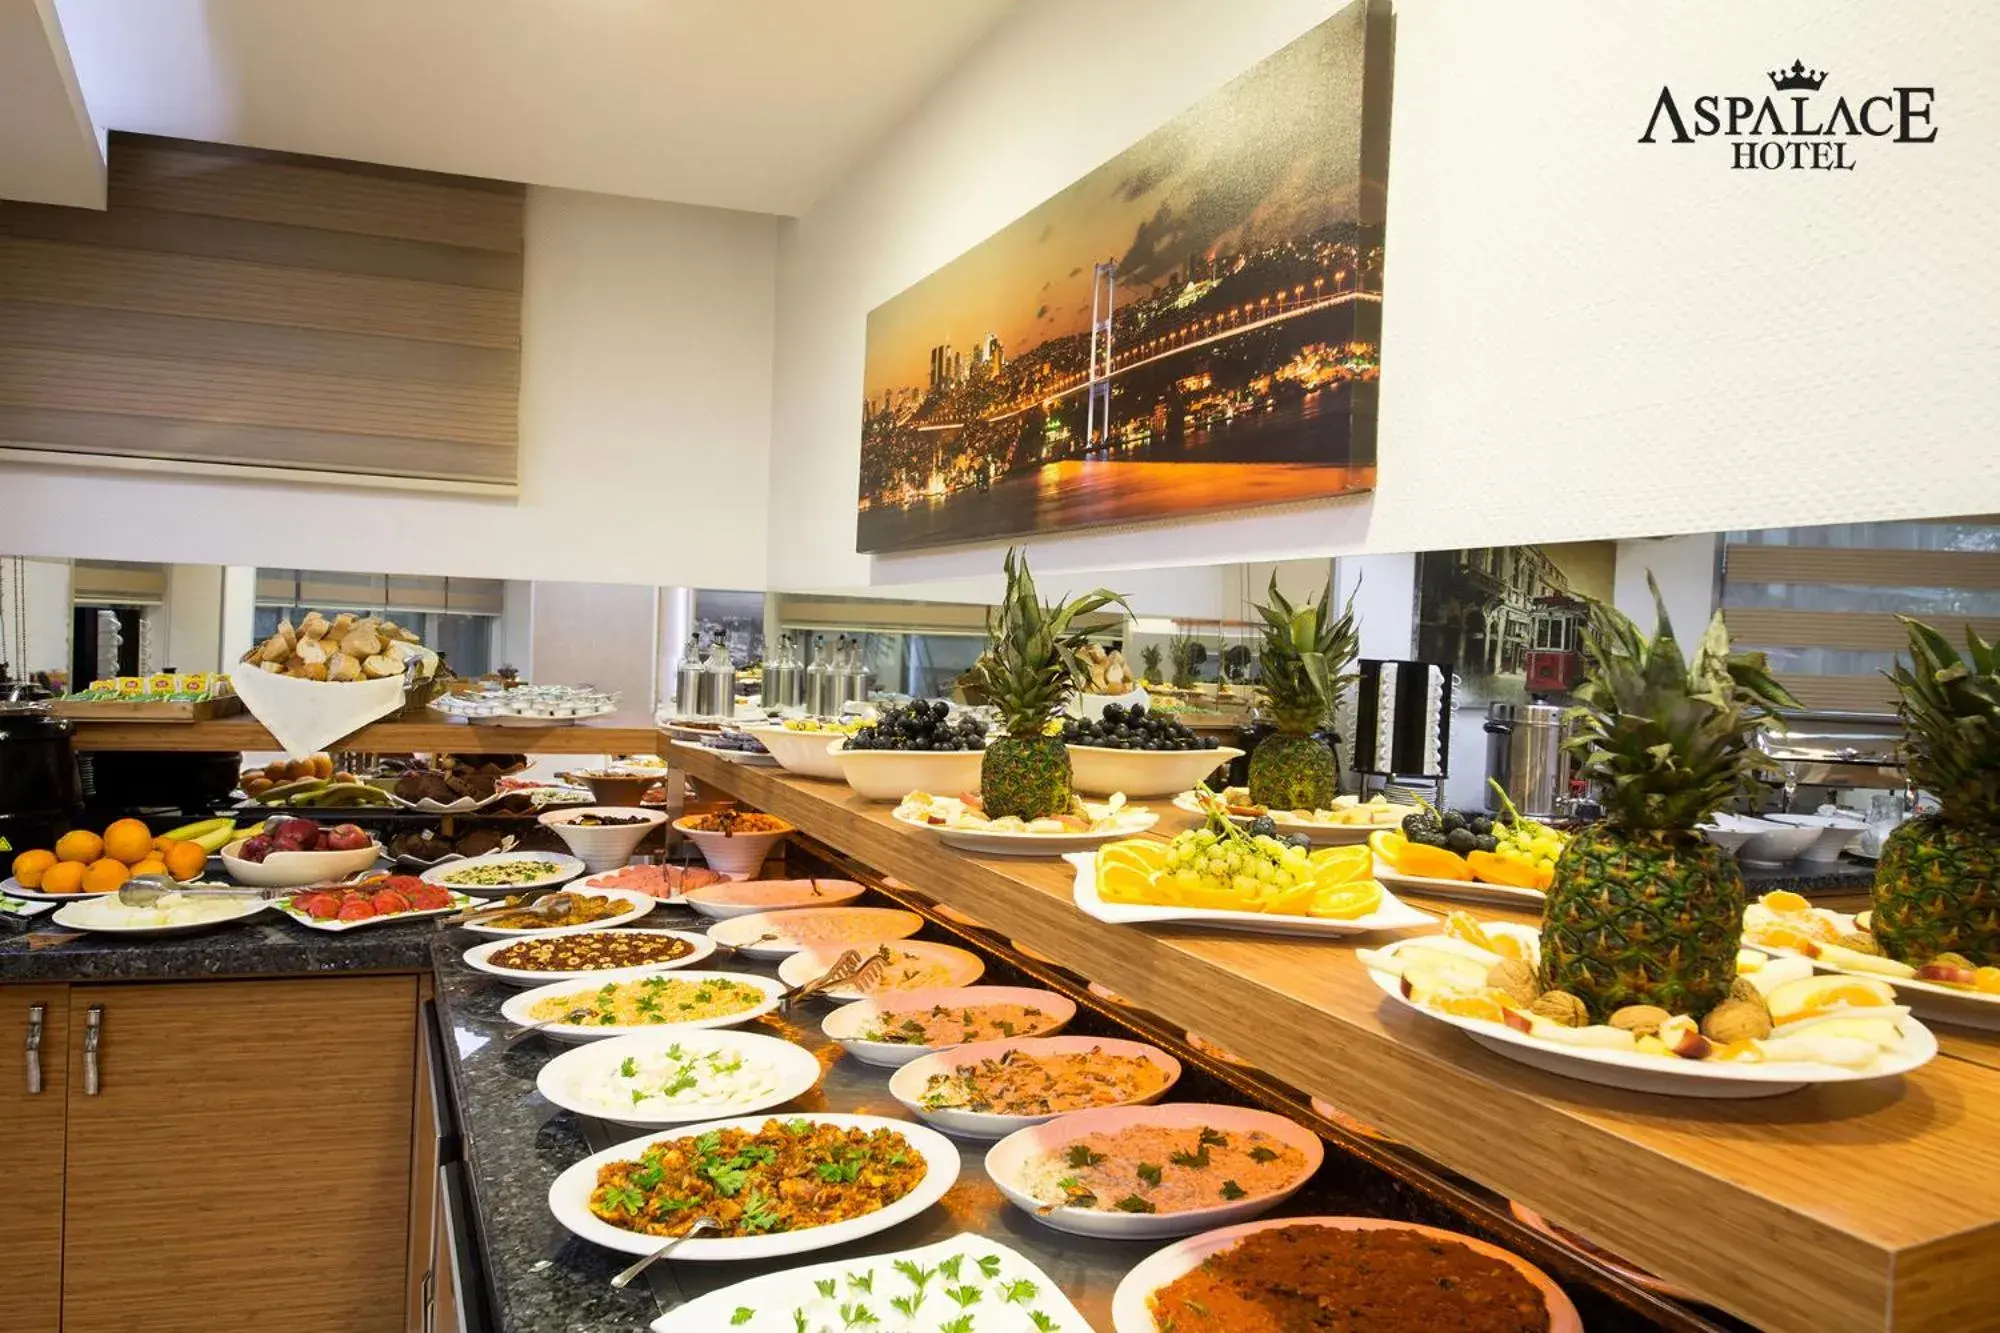 Restaurant/places to eat in Aspalace Hotel